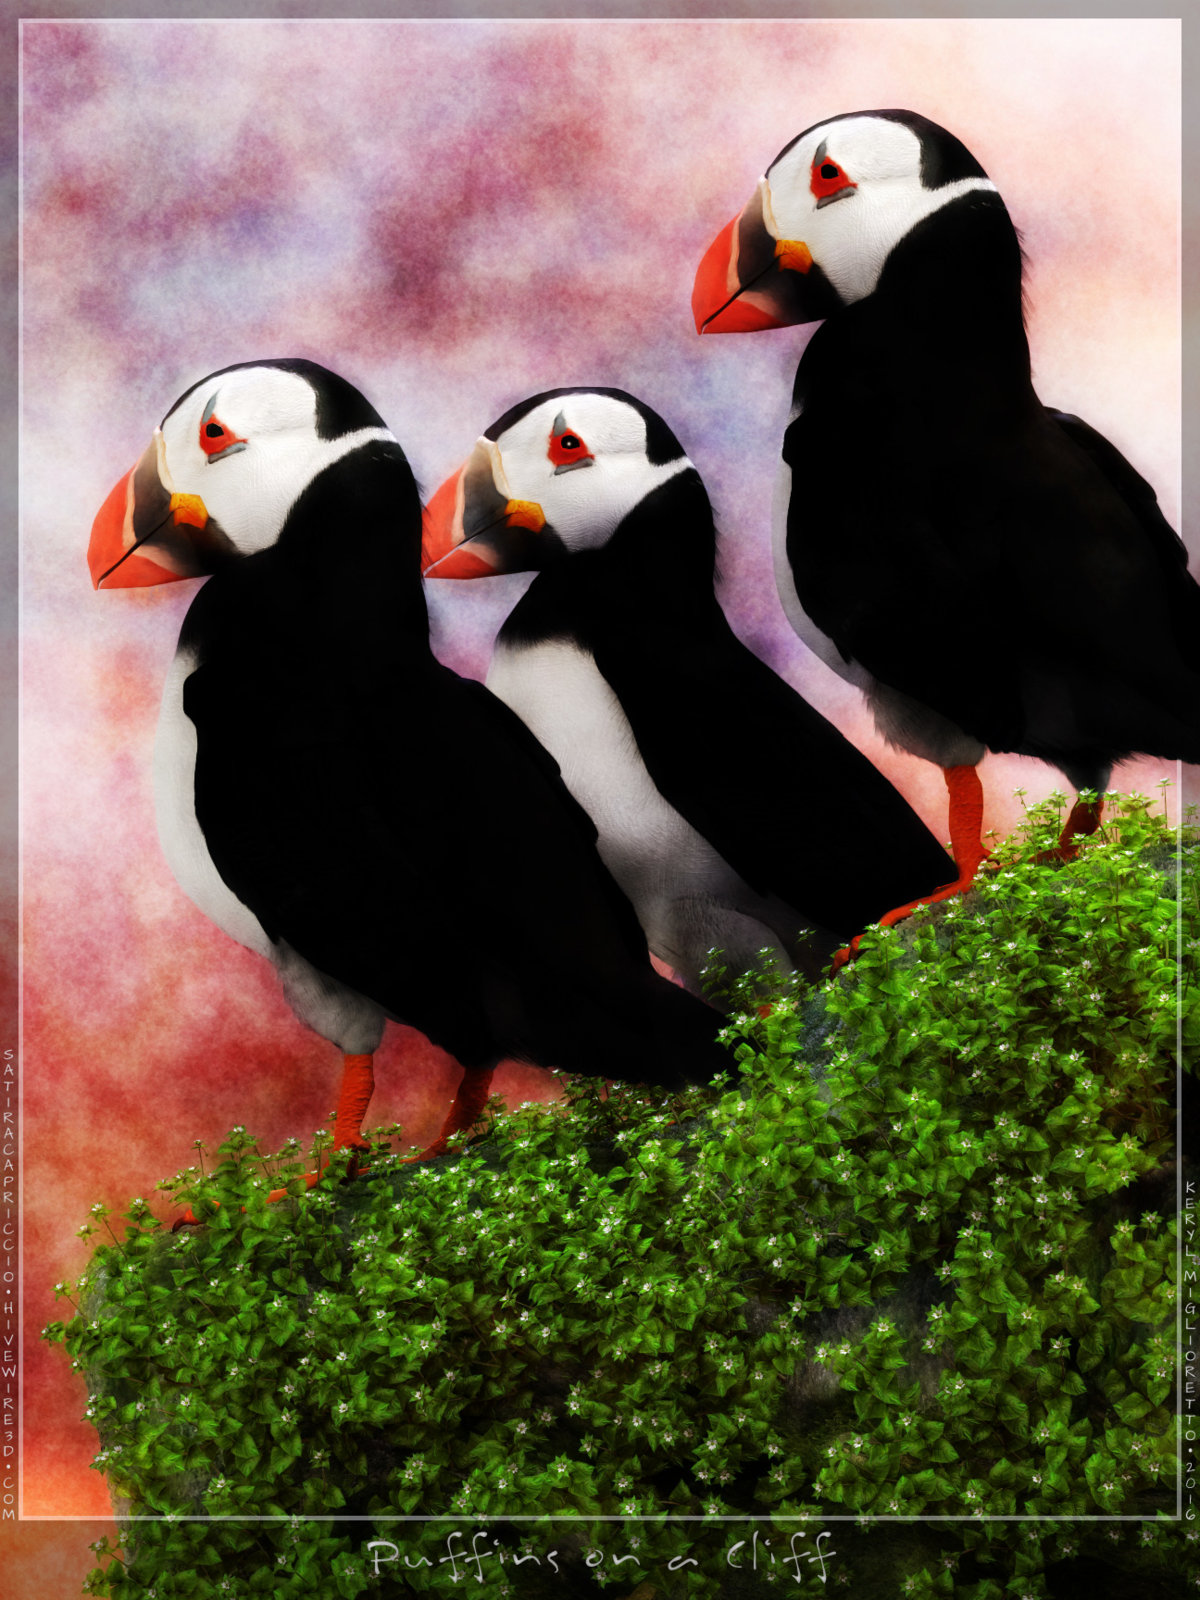 Puffins on a Cliff